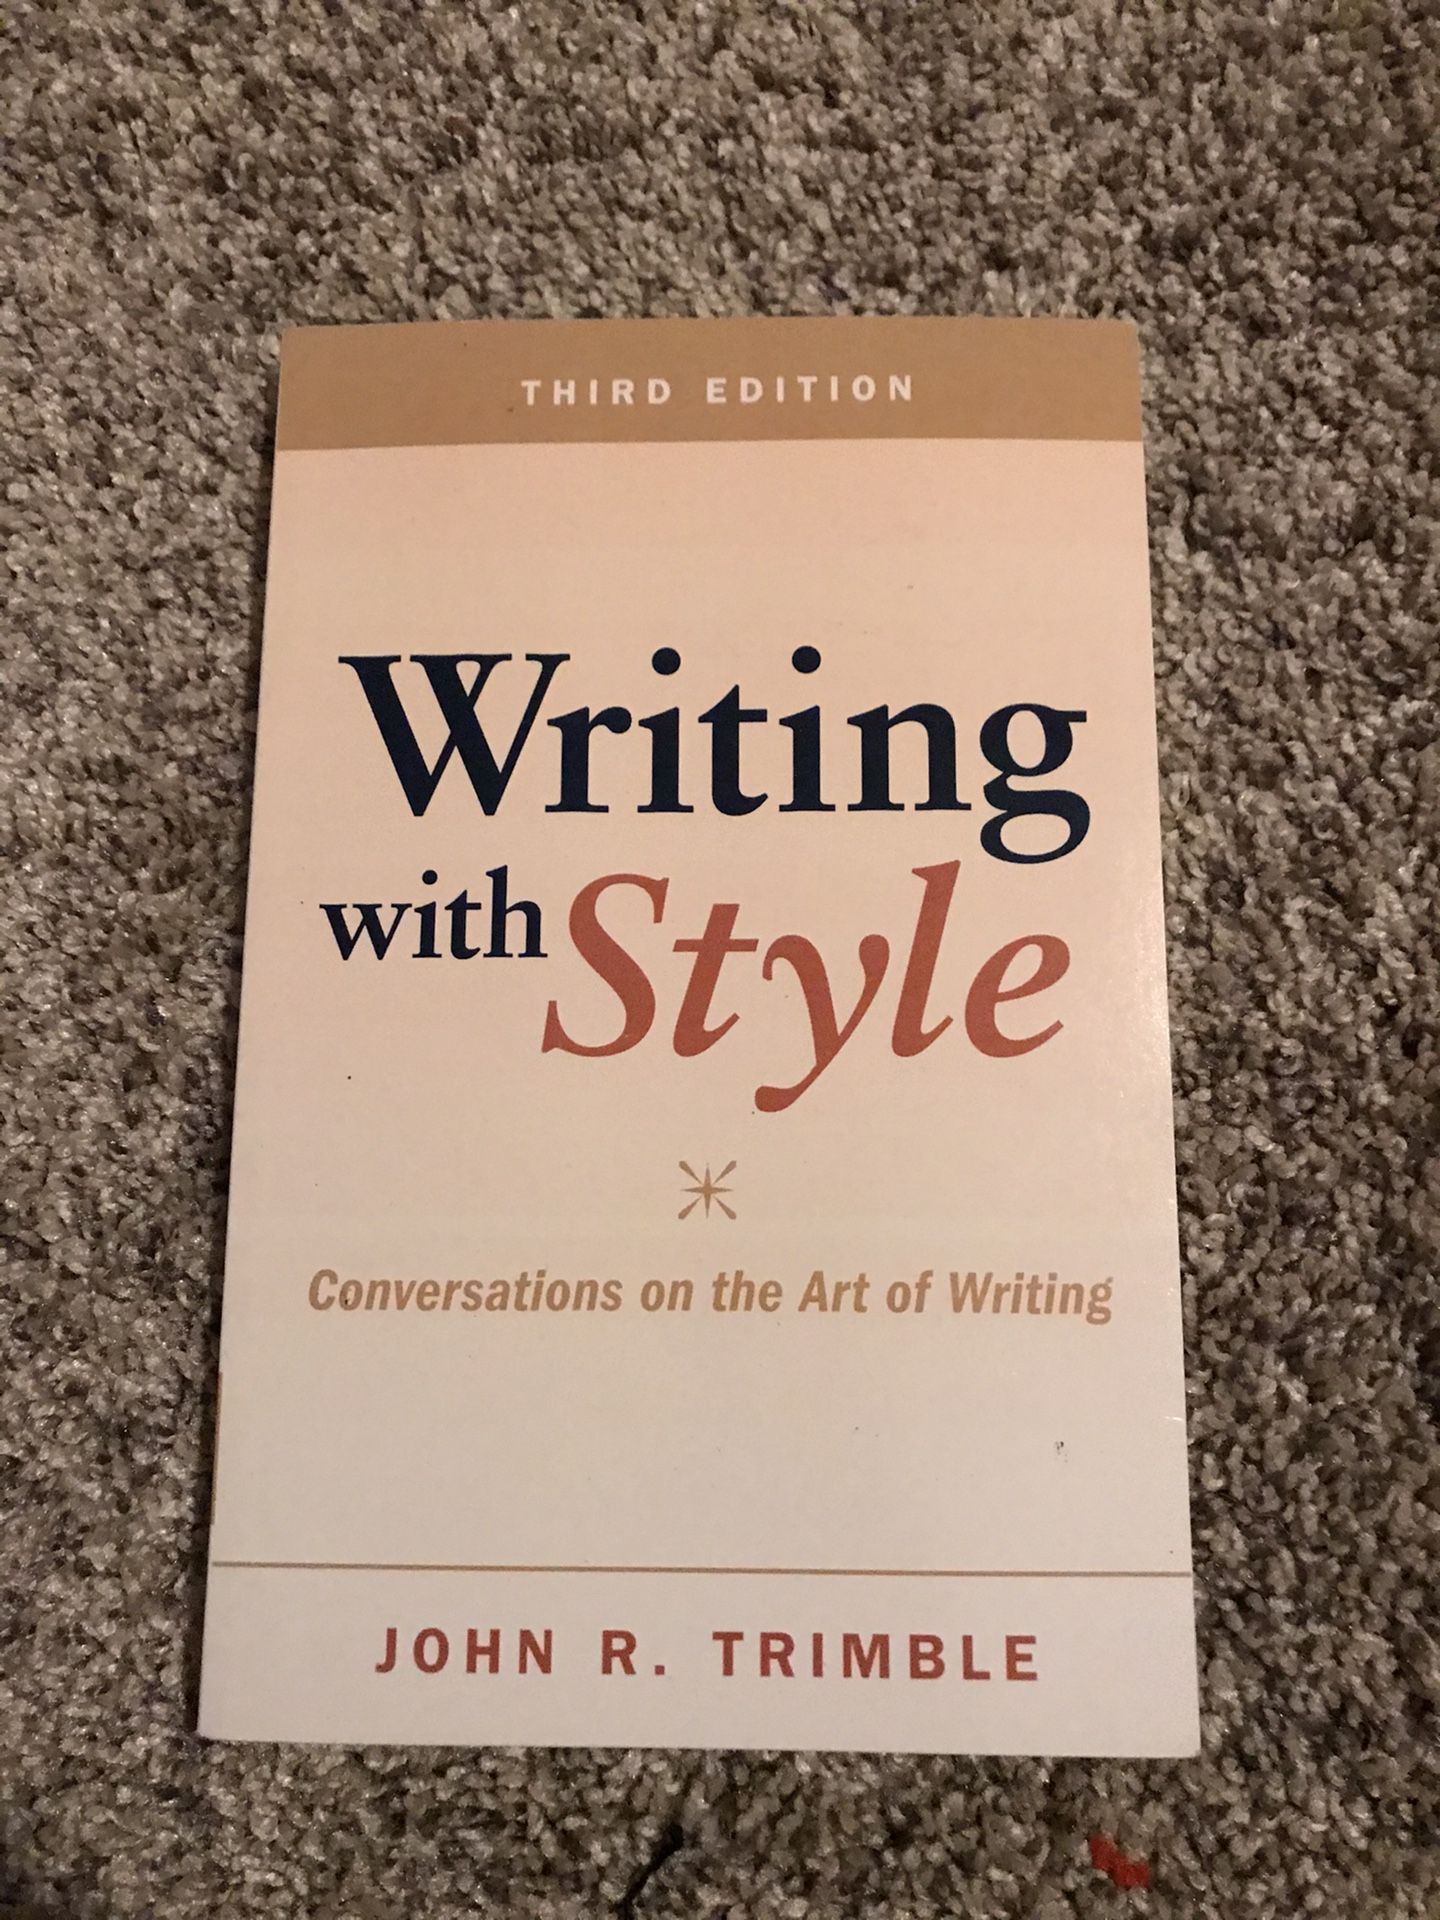 Writing with Style by John Trimble